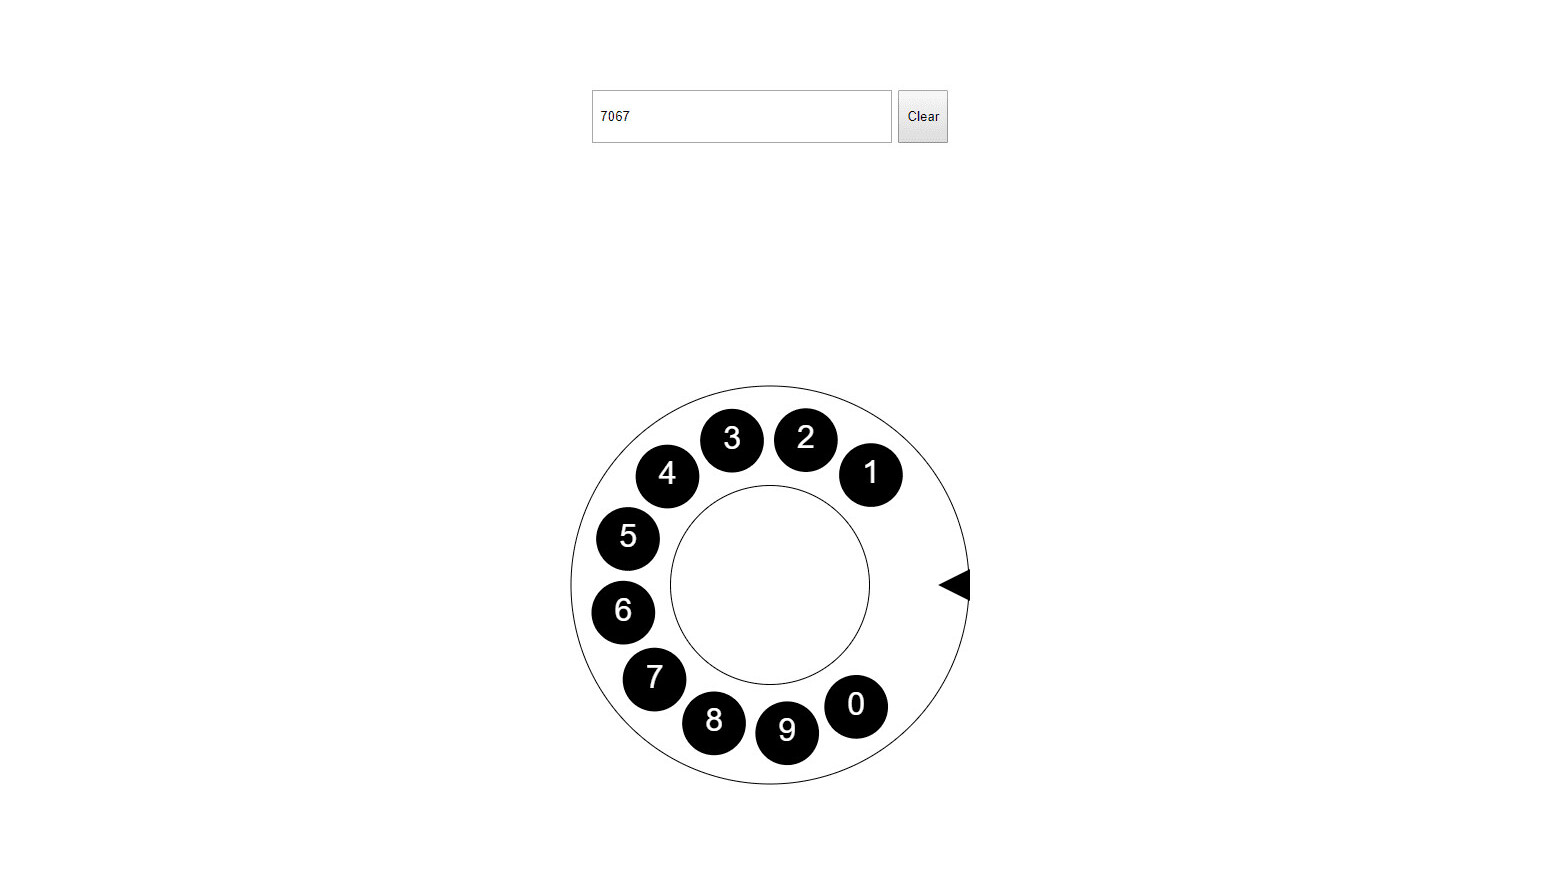 Bored programmer recreates a rotary dial in the browser (and it’s gloriously flawed)